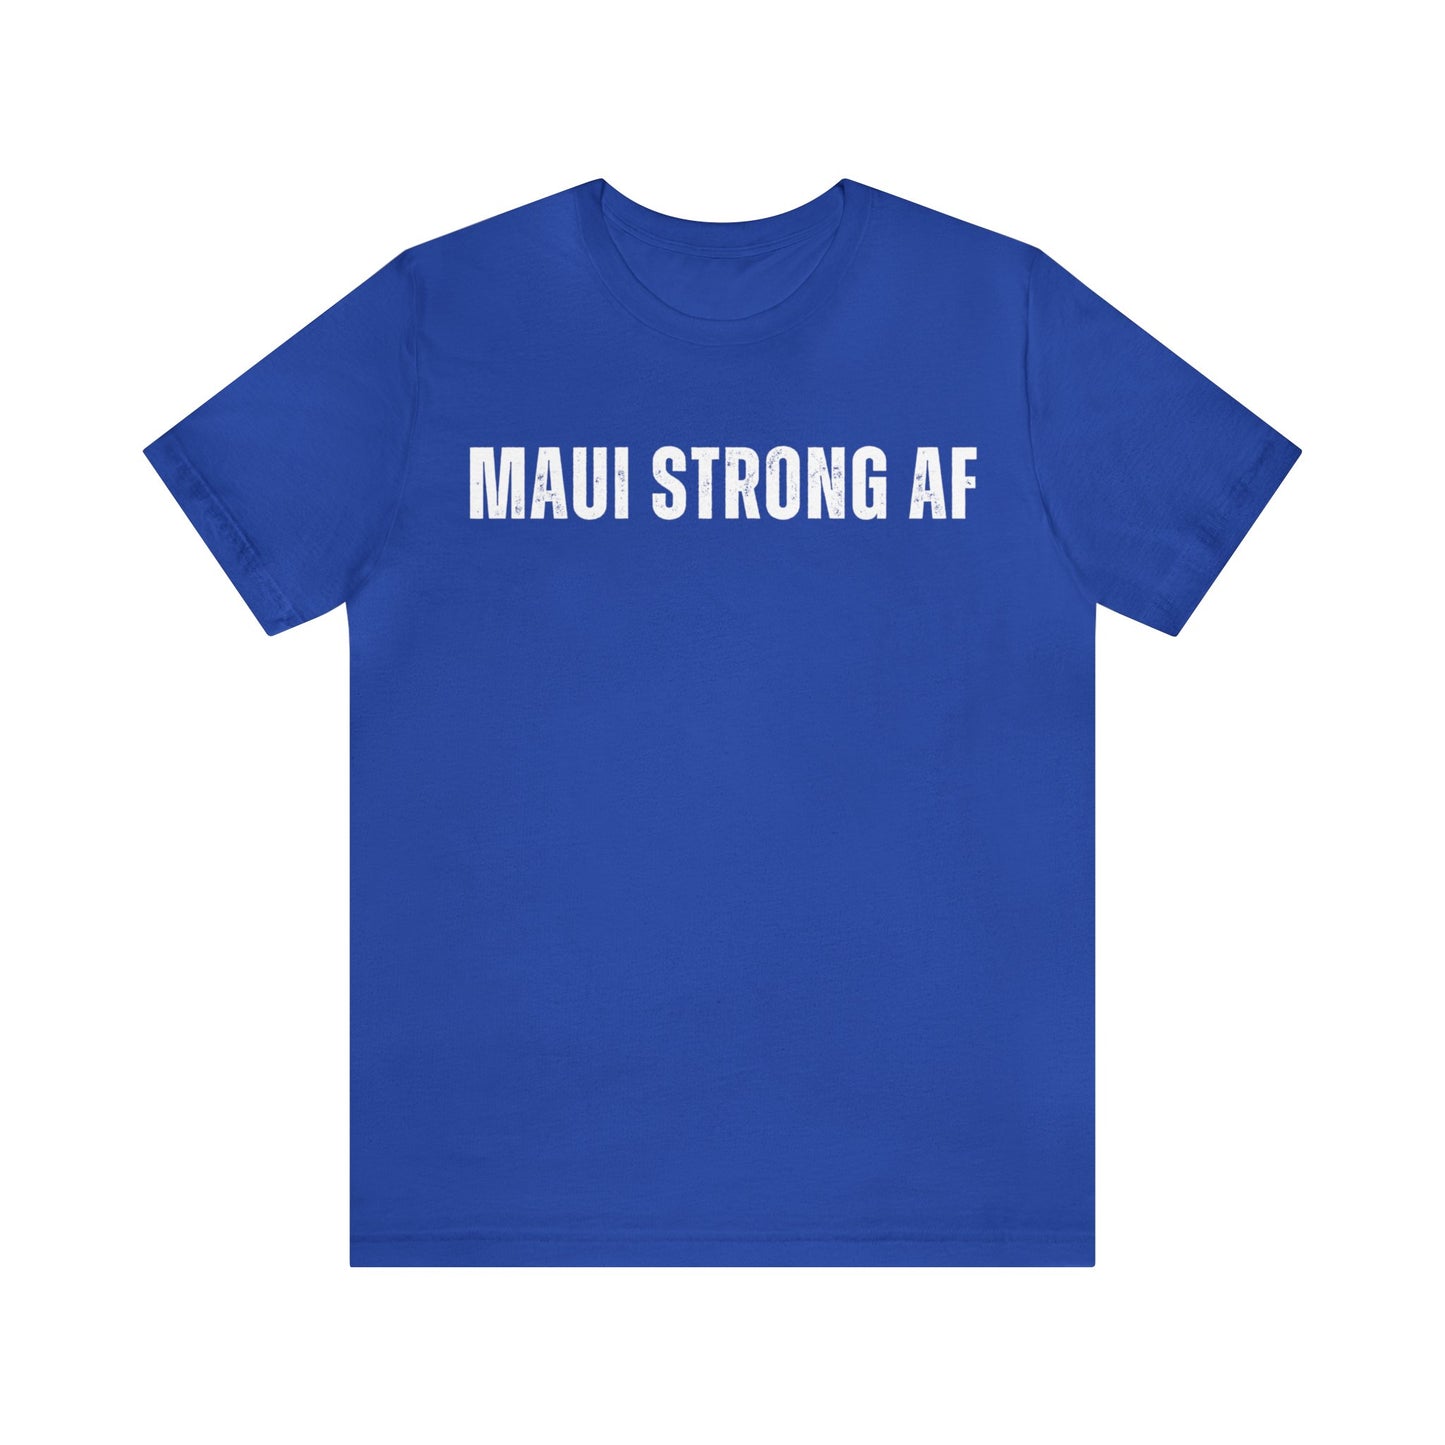 Maui Strong AF Unisex Cotton Tee in 3 colors